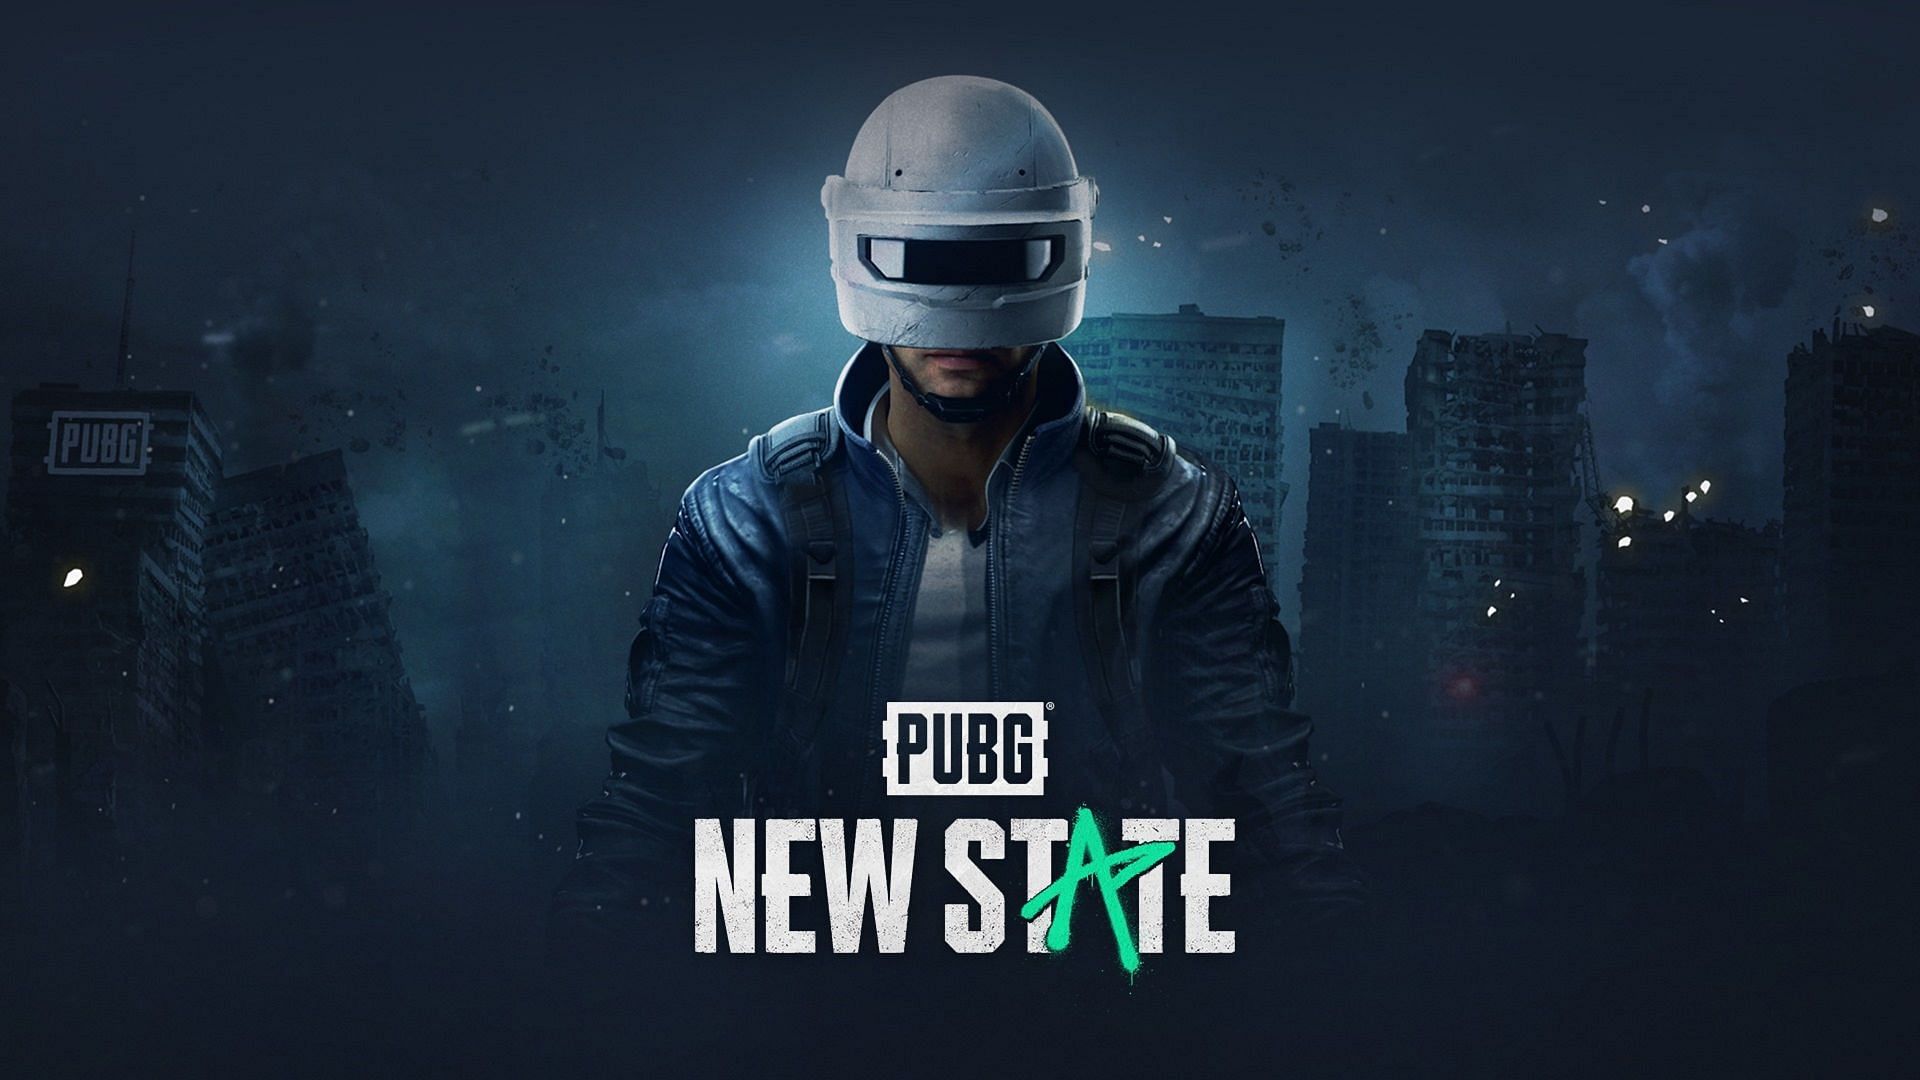 Technical Test of PUBG New State is out (Image via PUBG New State)